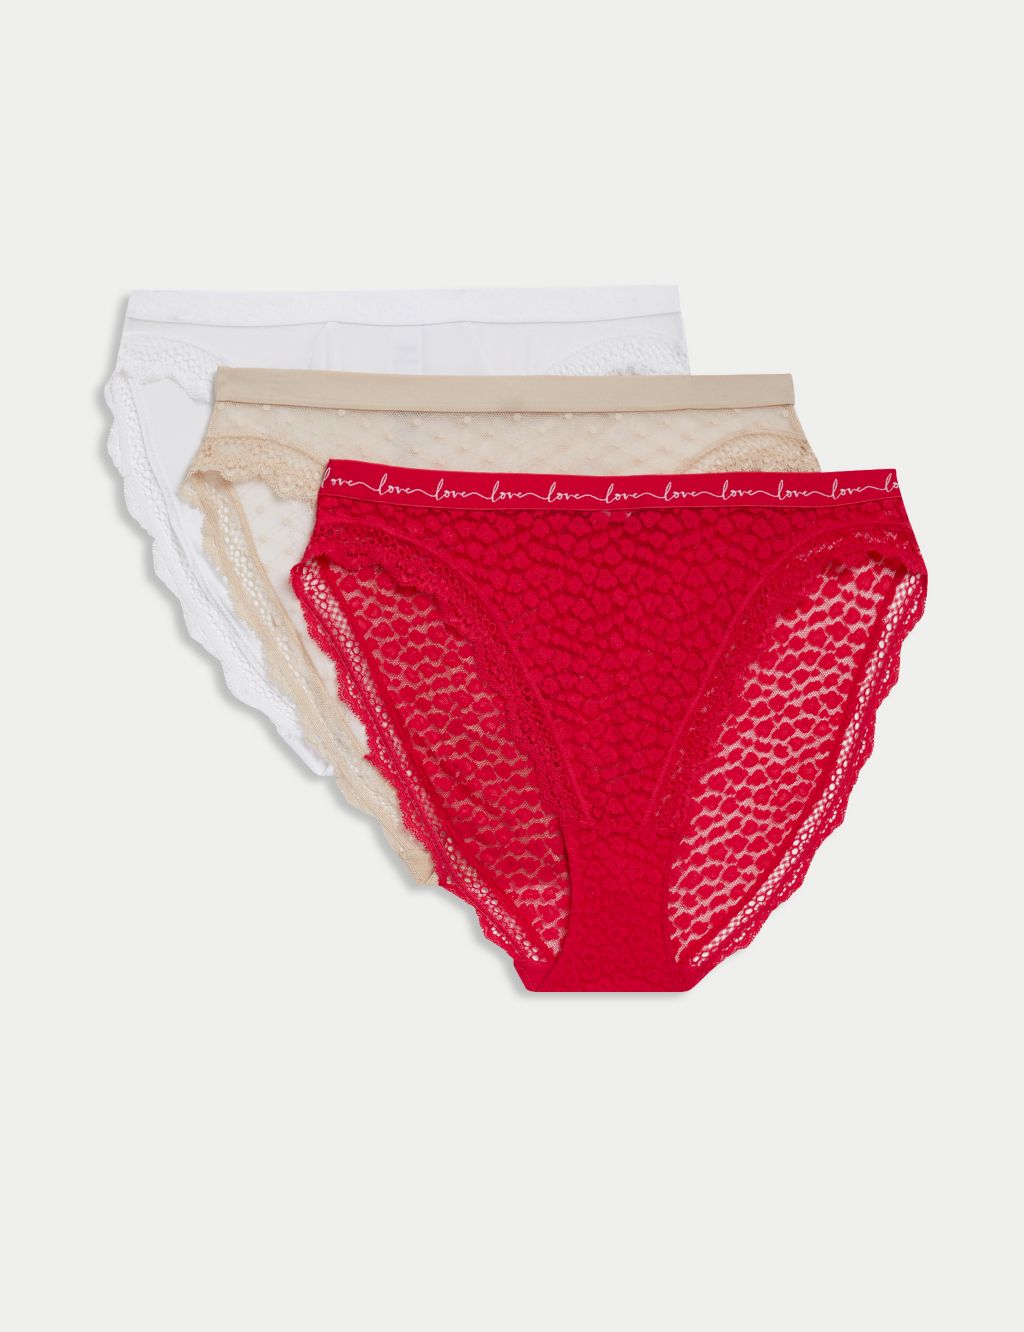 M&S Collection 3pk Lace & Mesh High Waisted Brazilian Knickers - ShopStyle  Panties